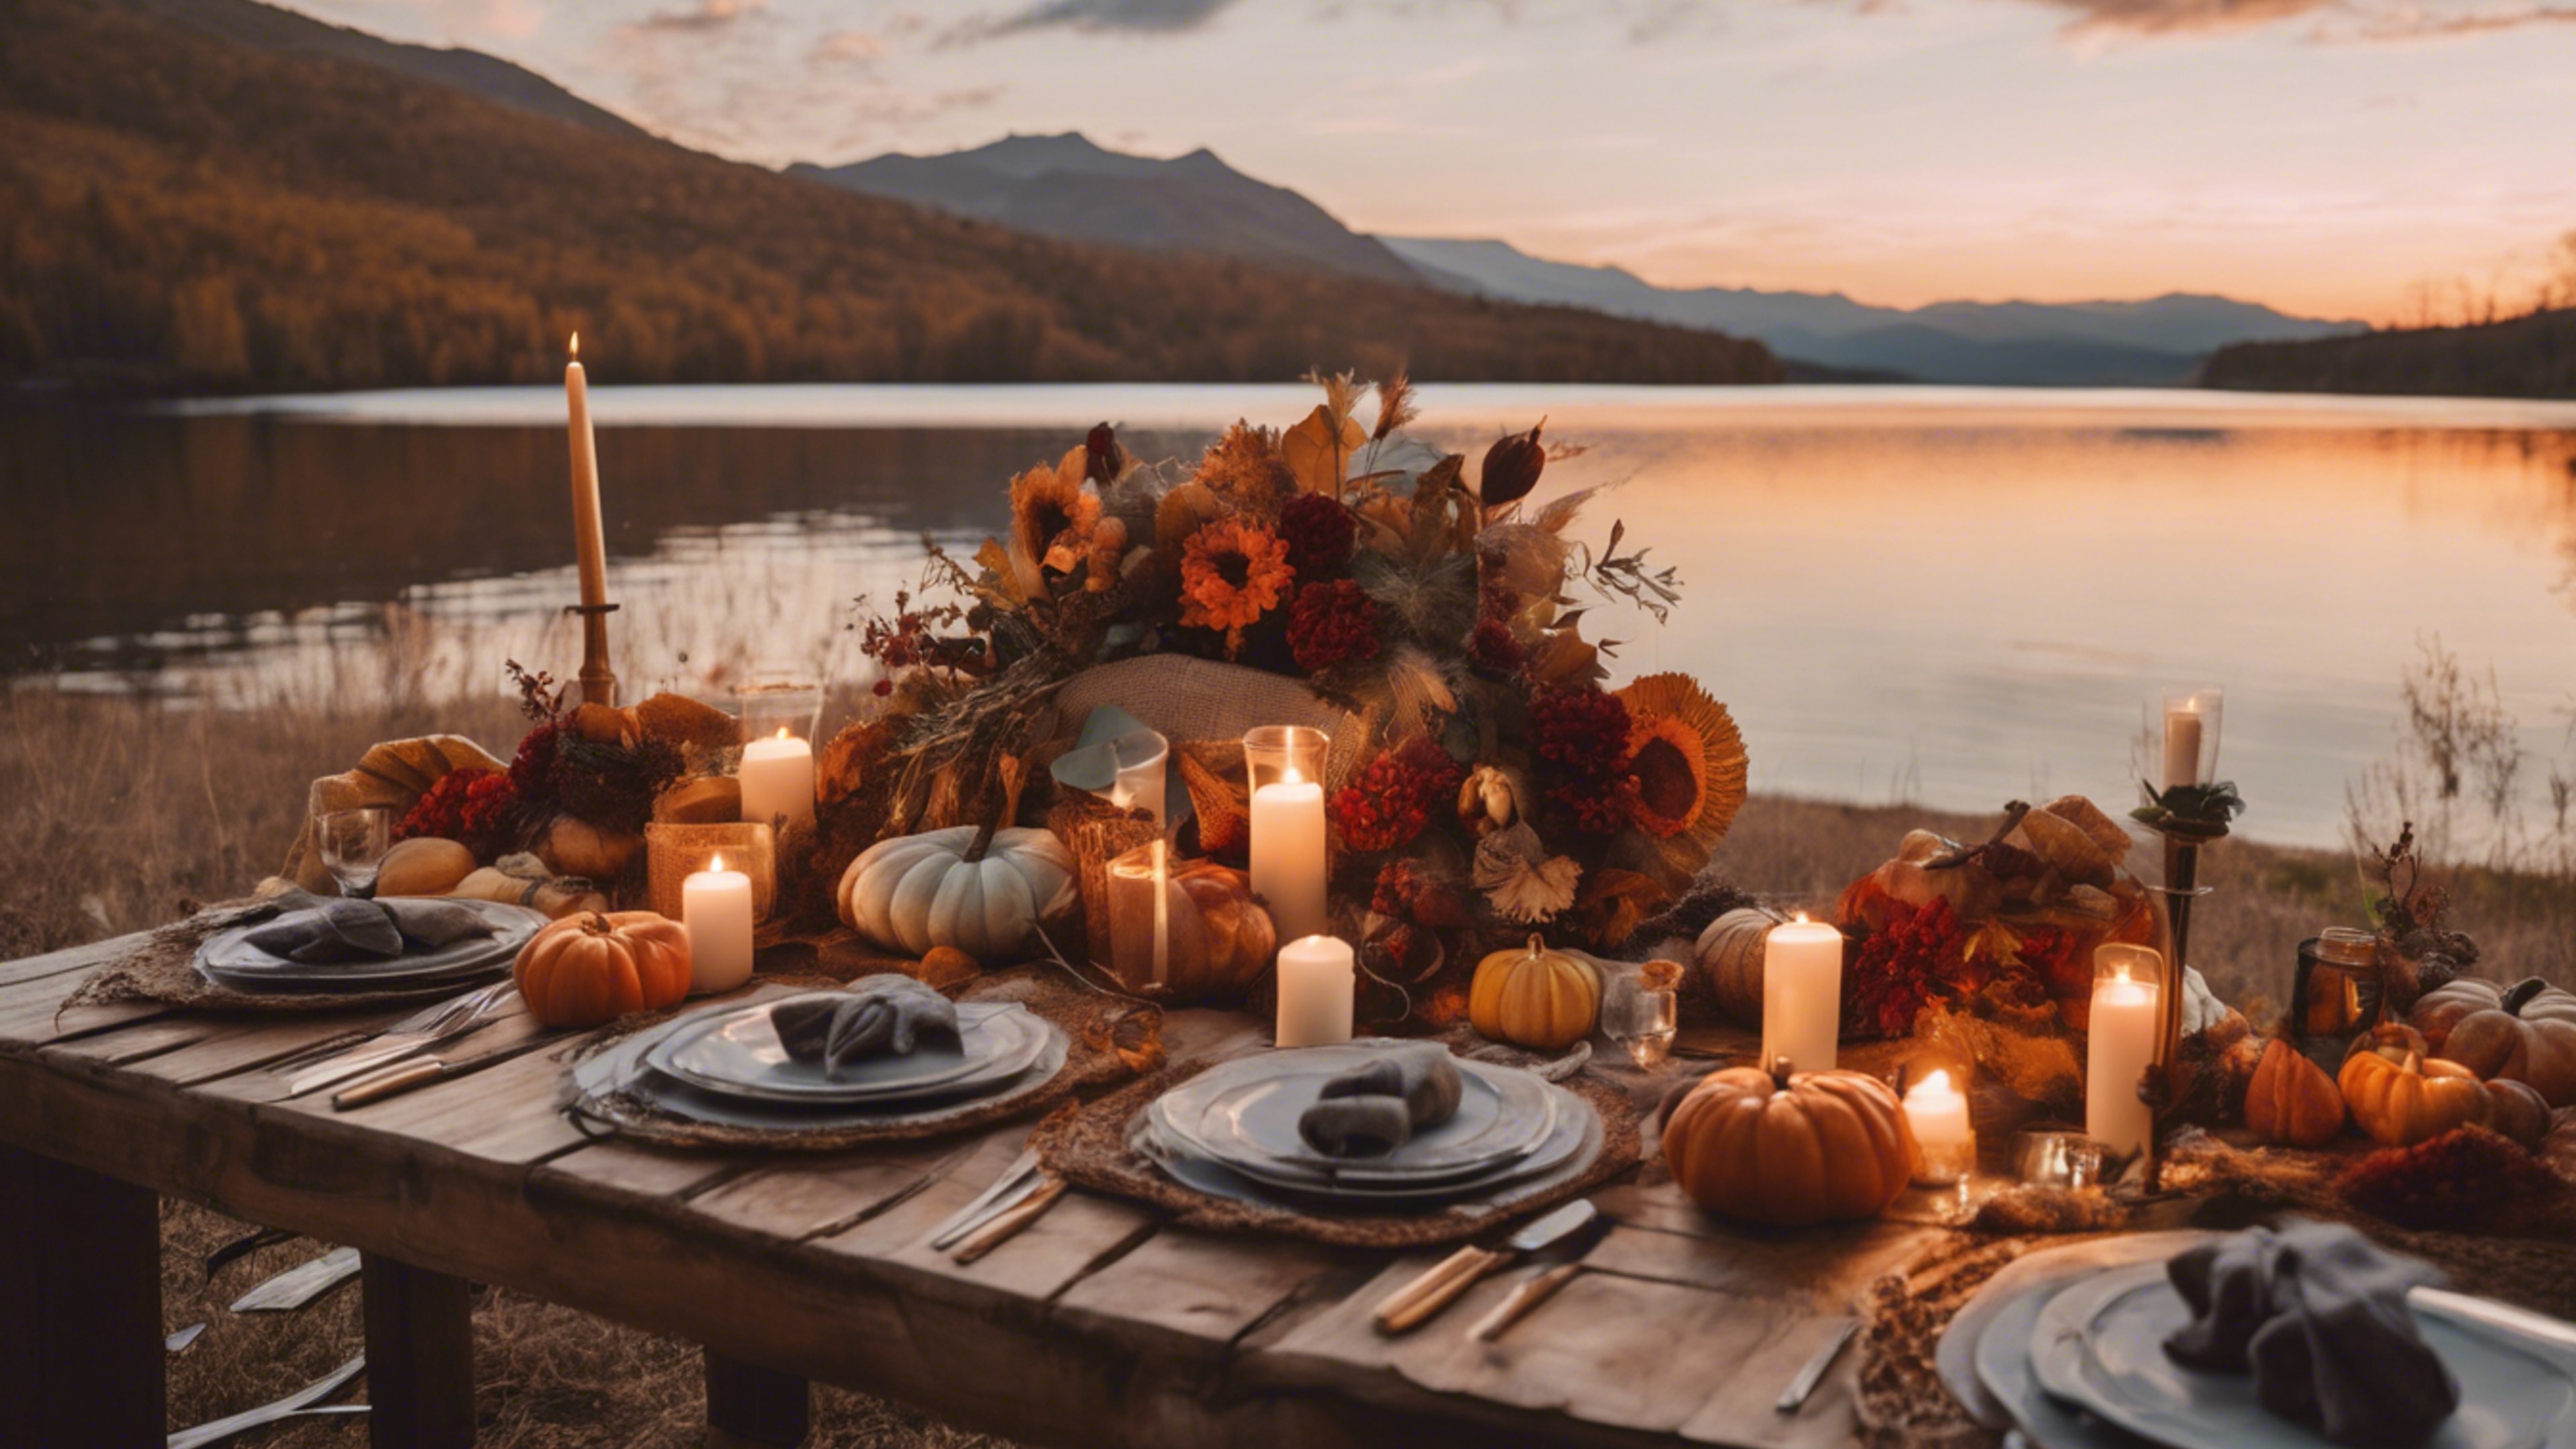 An outdoor Thanksgiving setup with boho decorations next to a breathtaking mountain lake during sunset.壁紙[488ff8a1b73146e3b682]